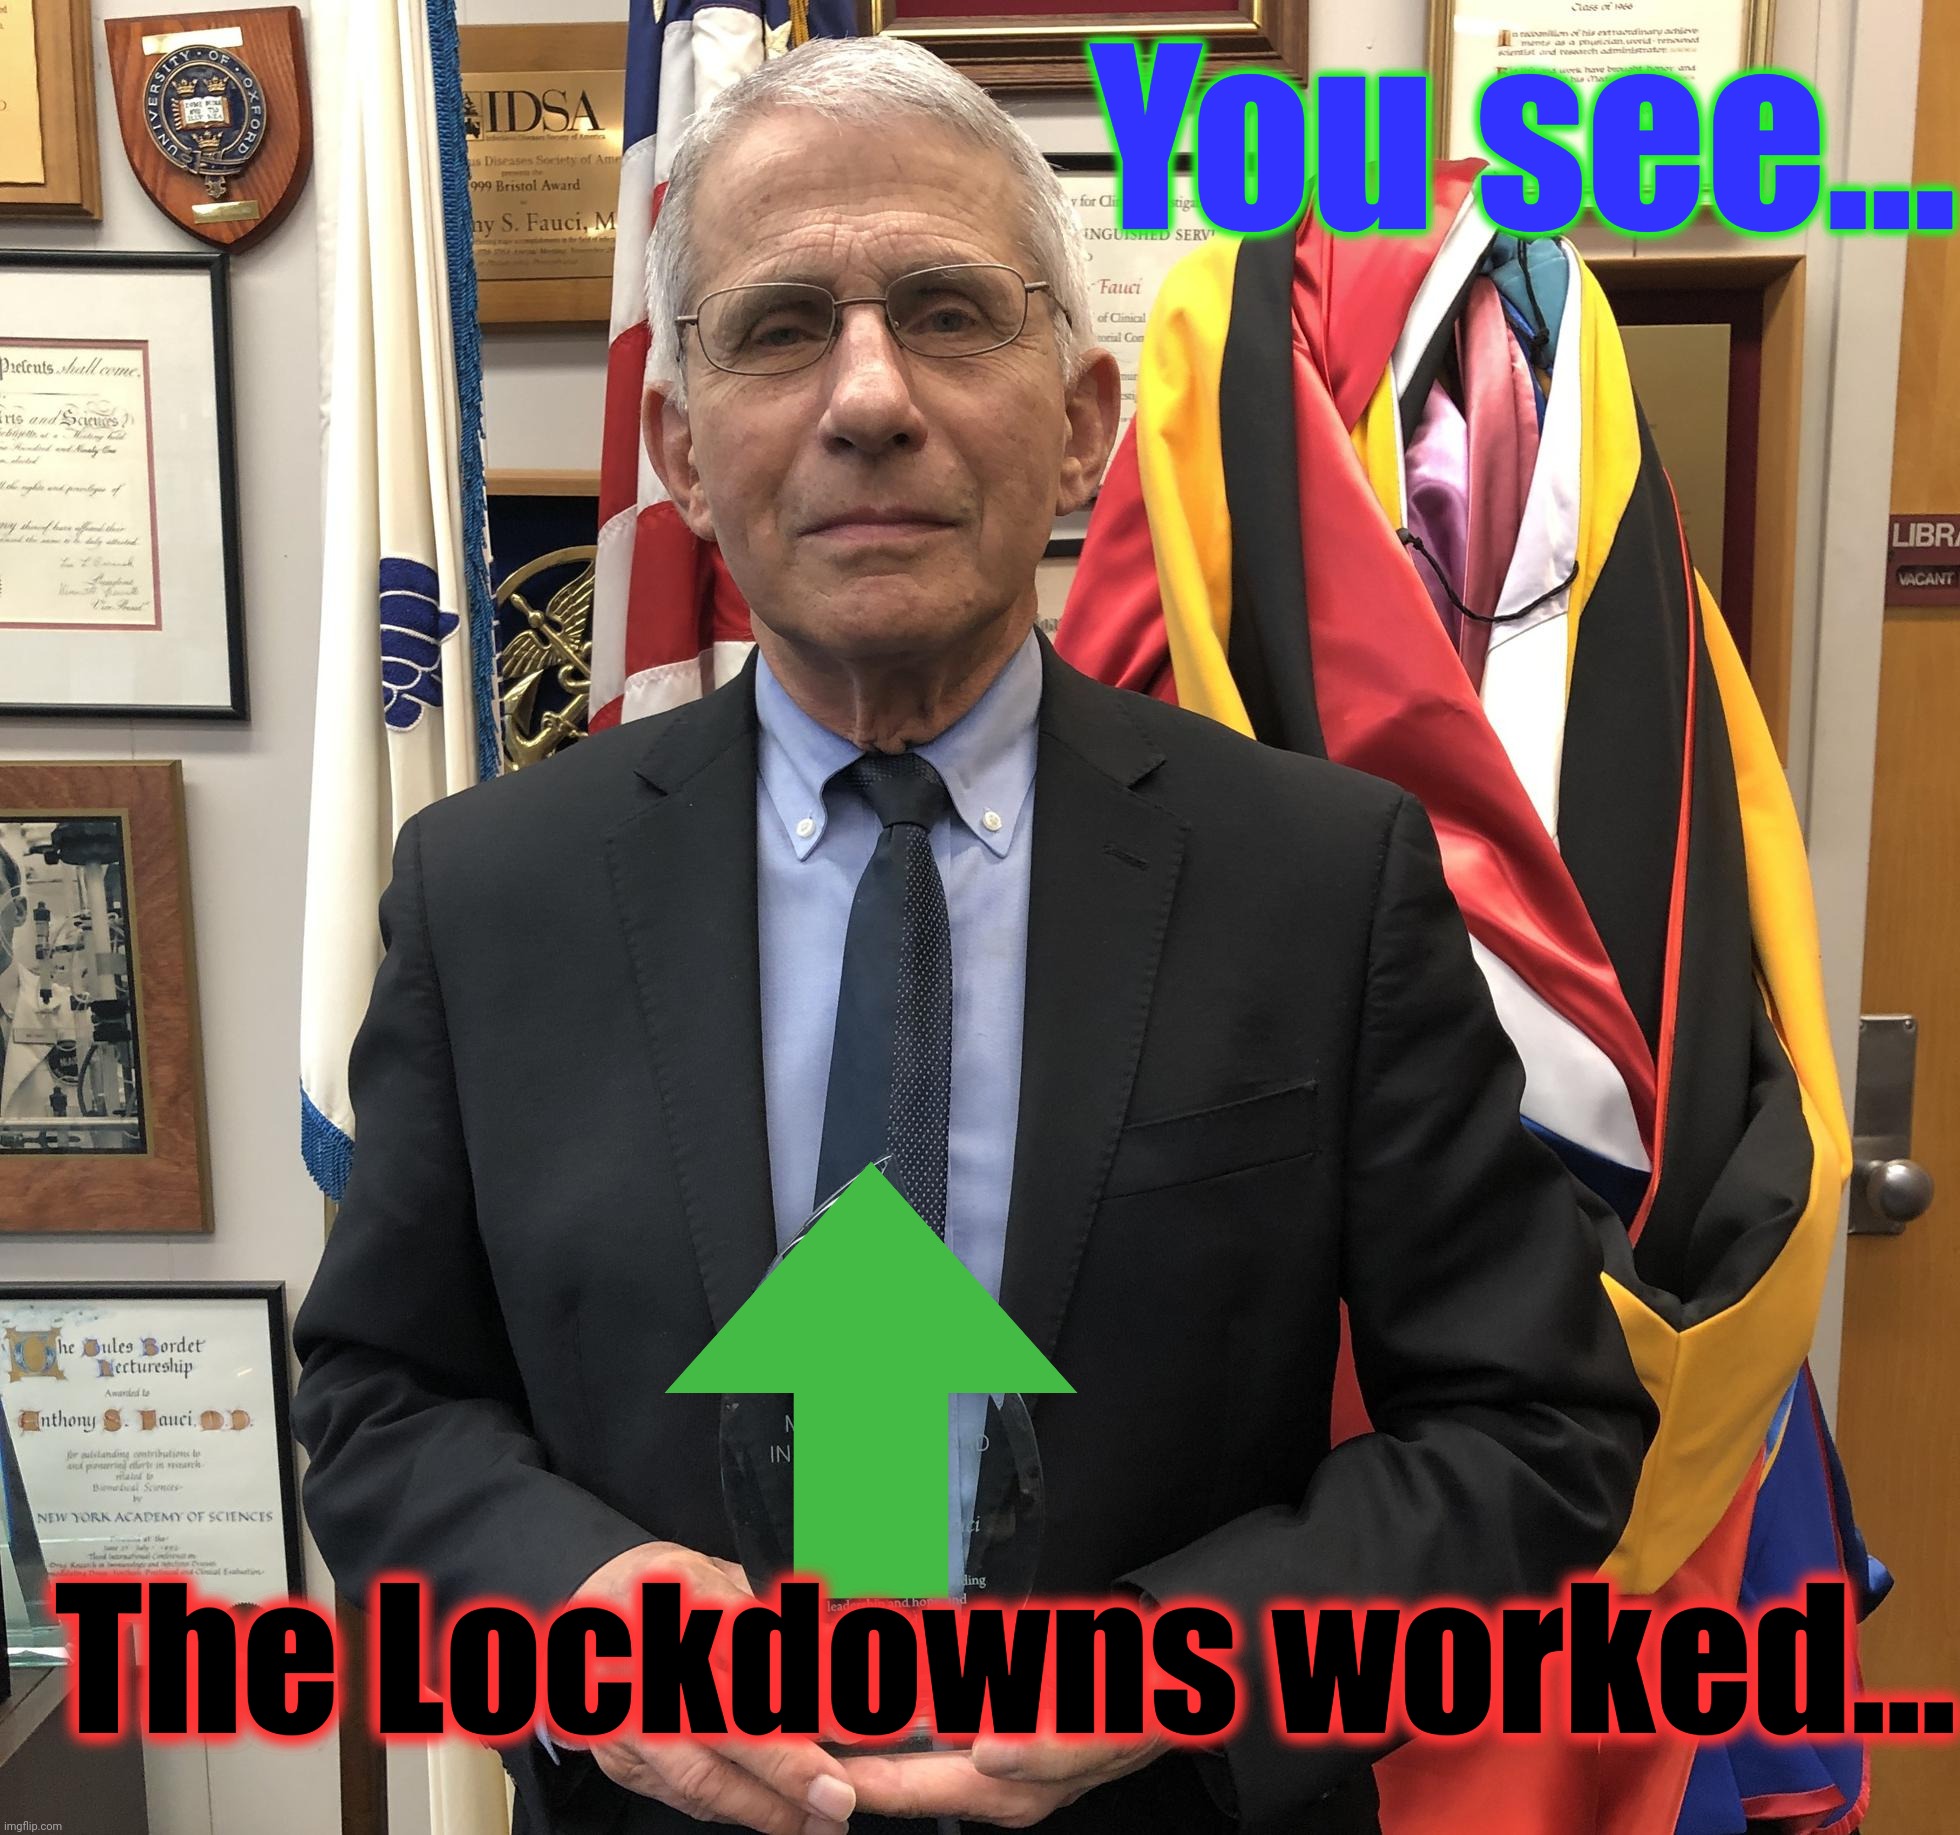 You see... The Lockdowns worked... | made w/ Imgflip meme maker